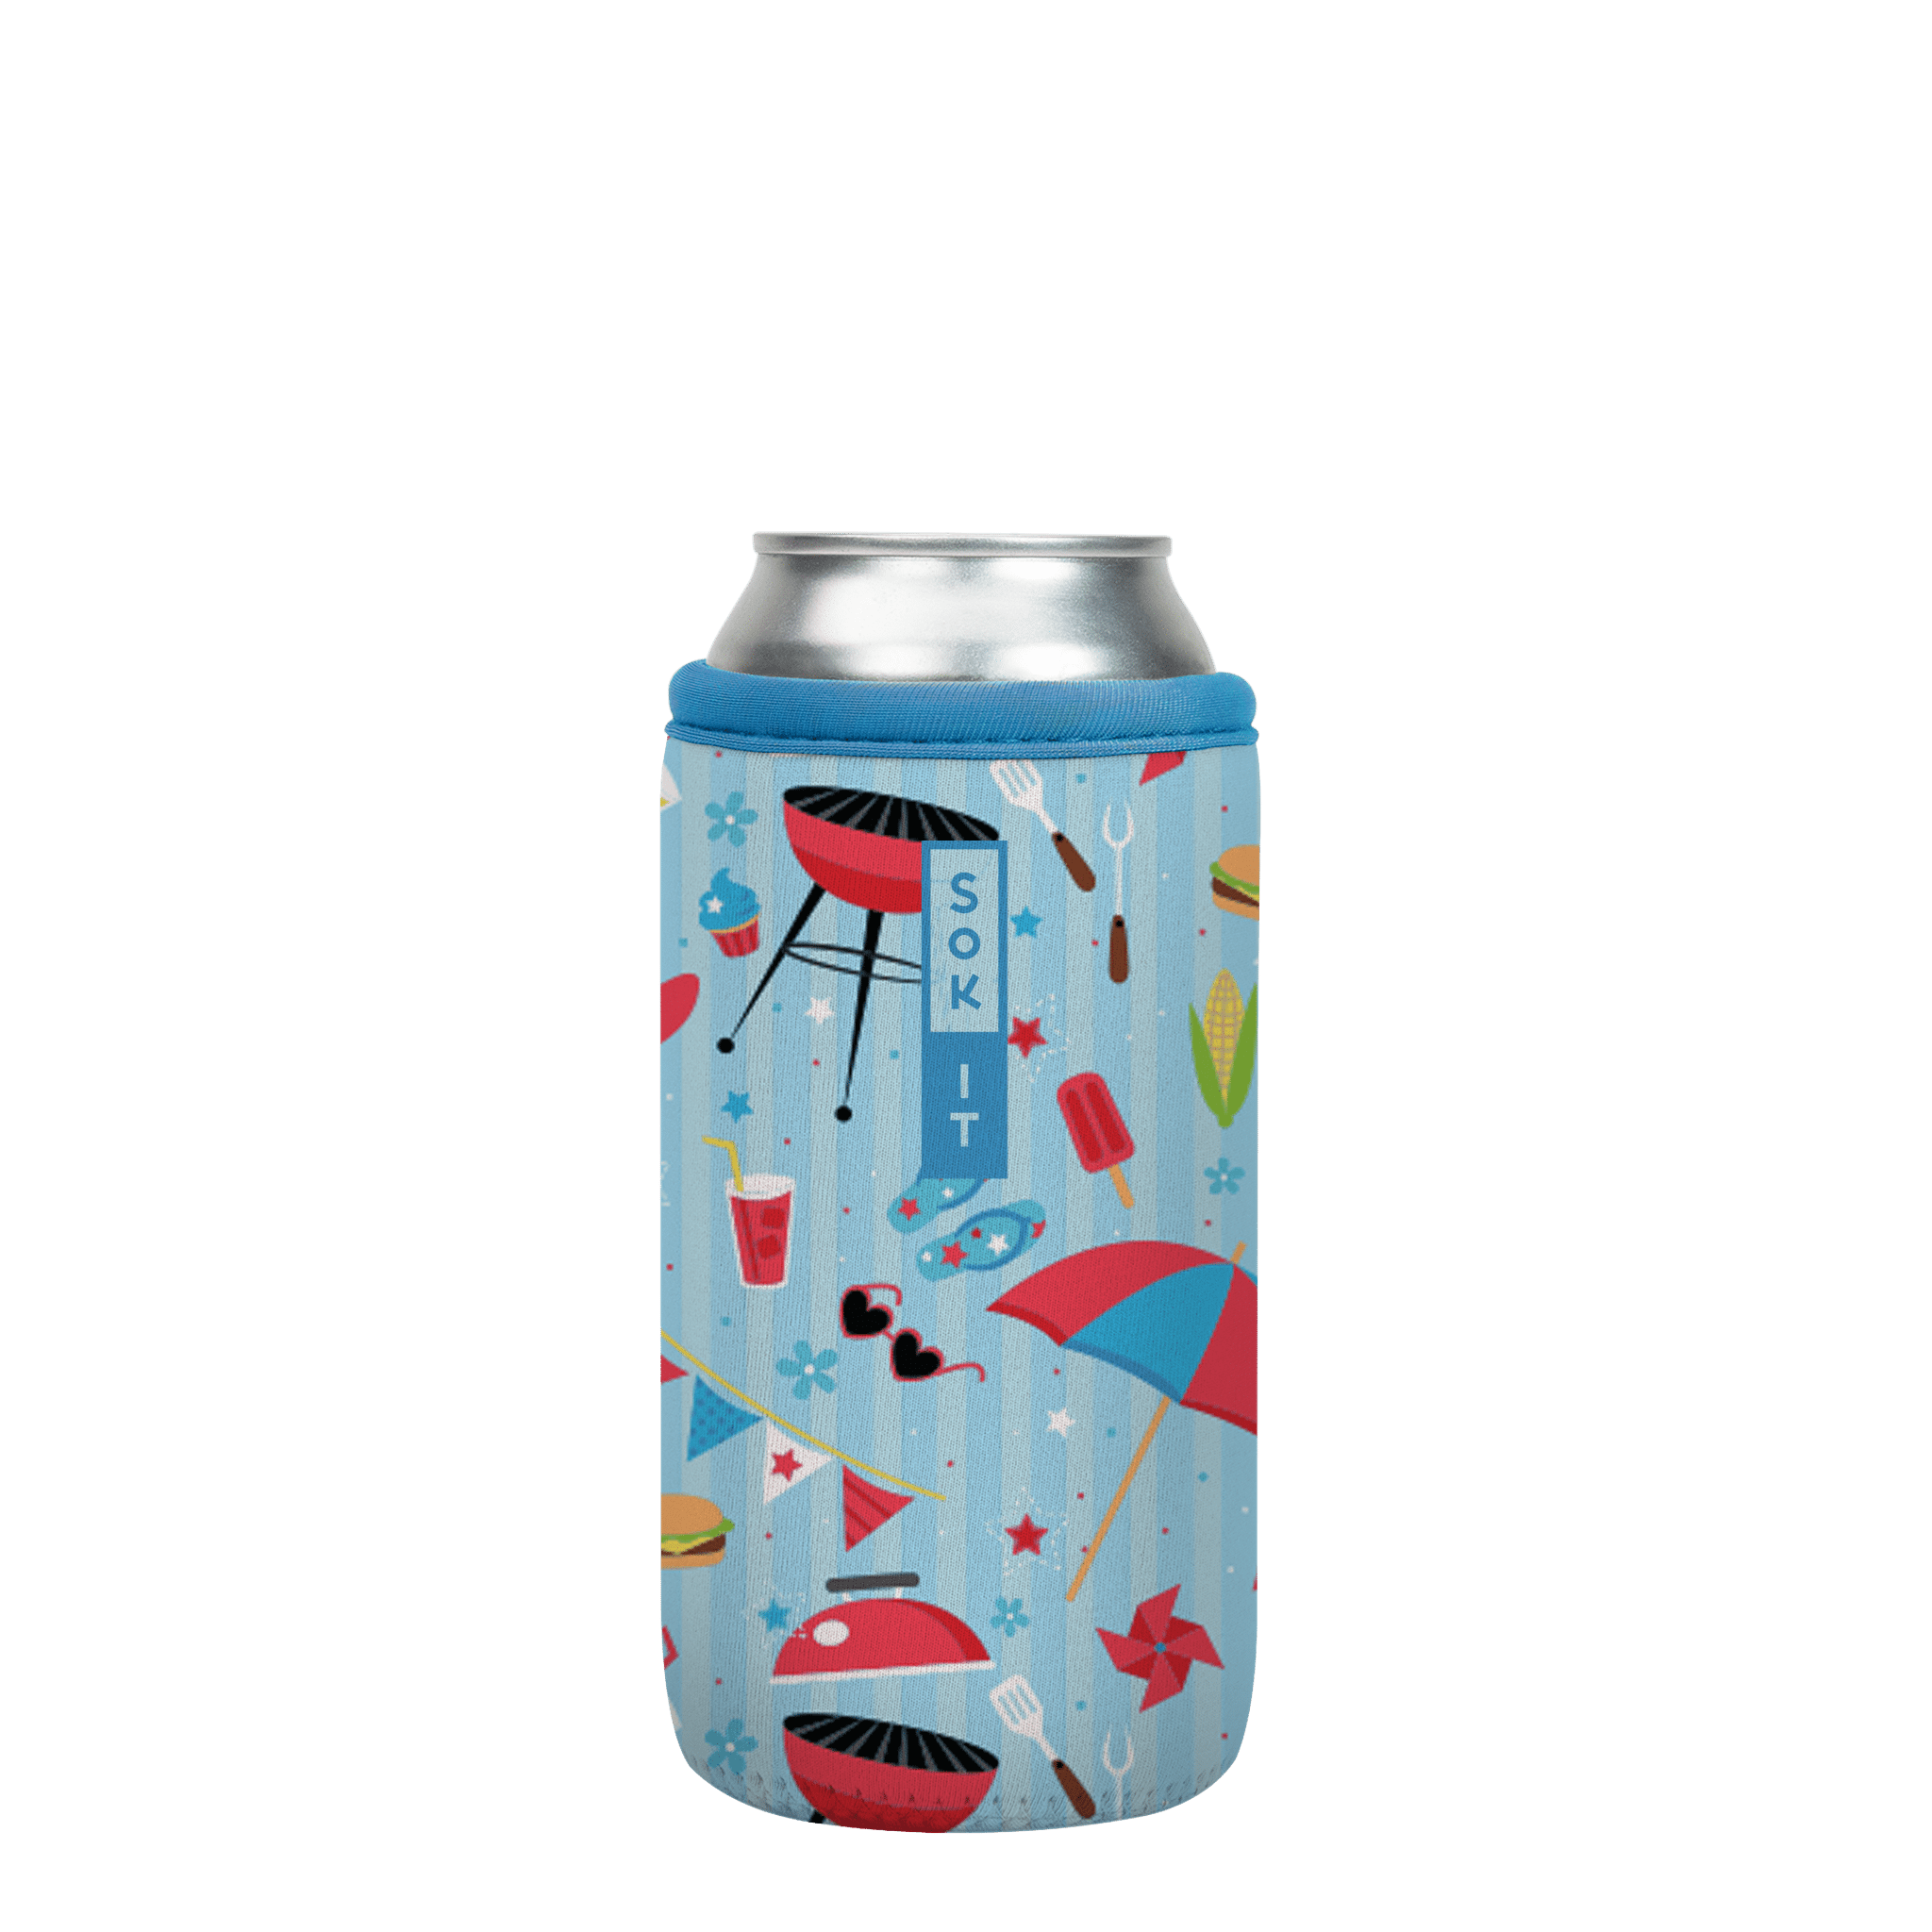 CanSok-Summertime 16oz Can 